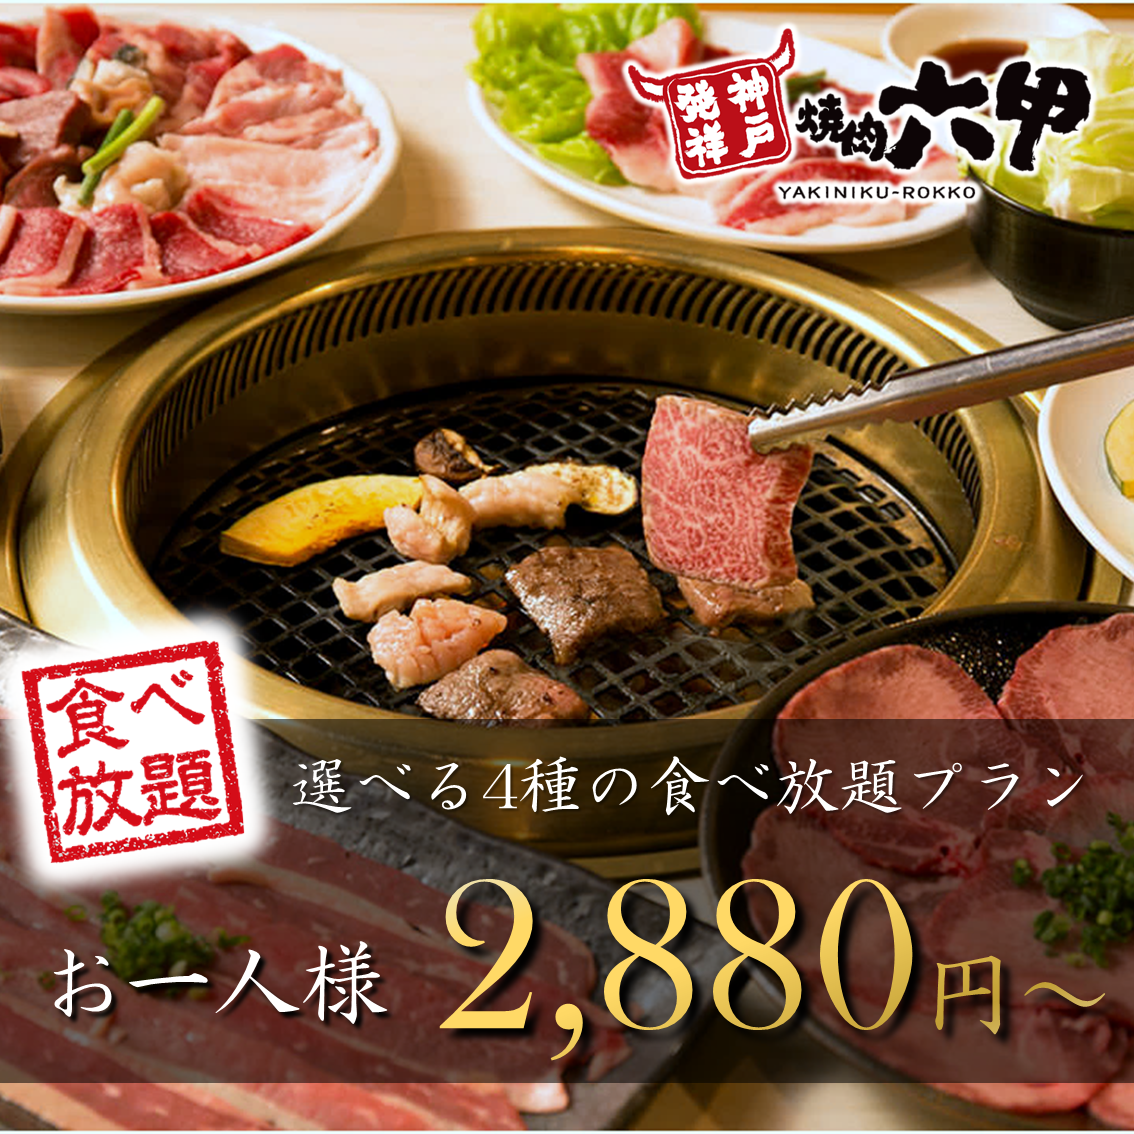 [When you want to eat a lot!] All-you-can-eat plan from 2,480 yen